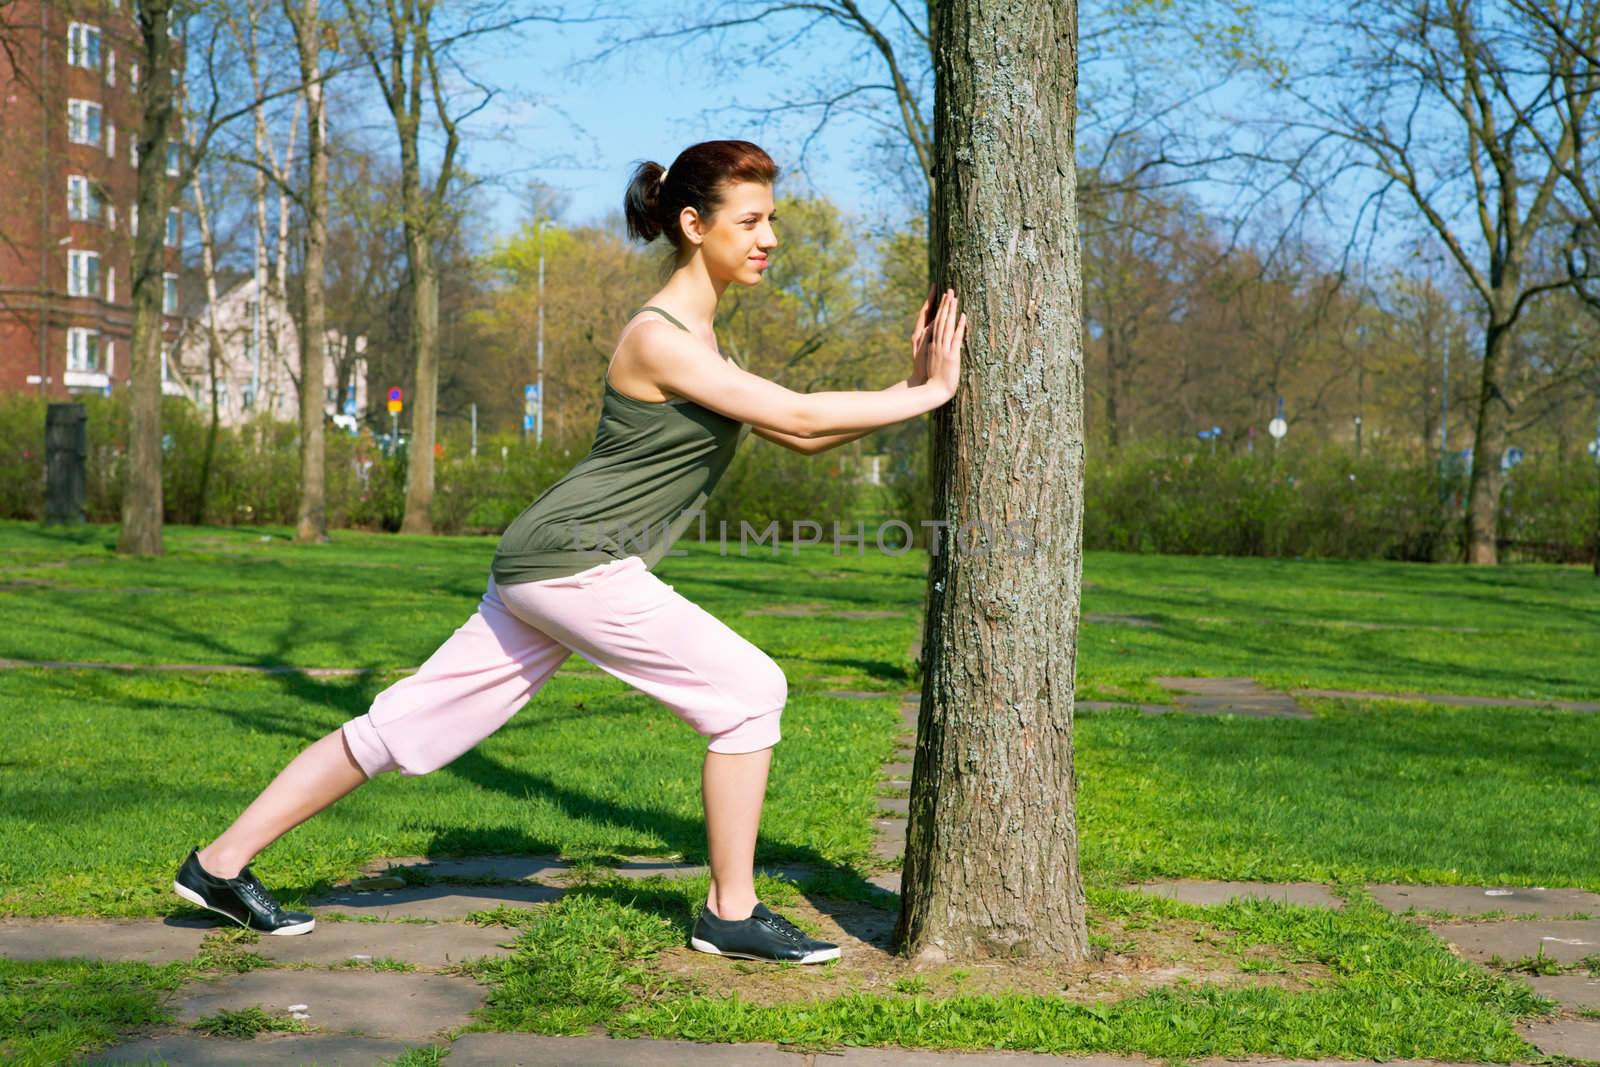 Teenage girl stretching in city park in spring